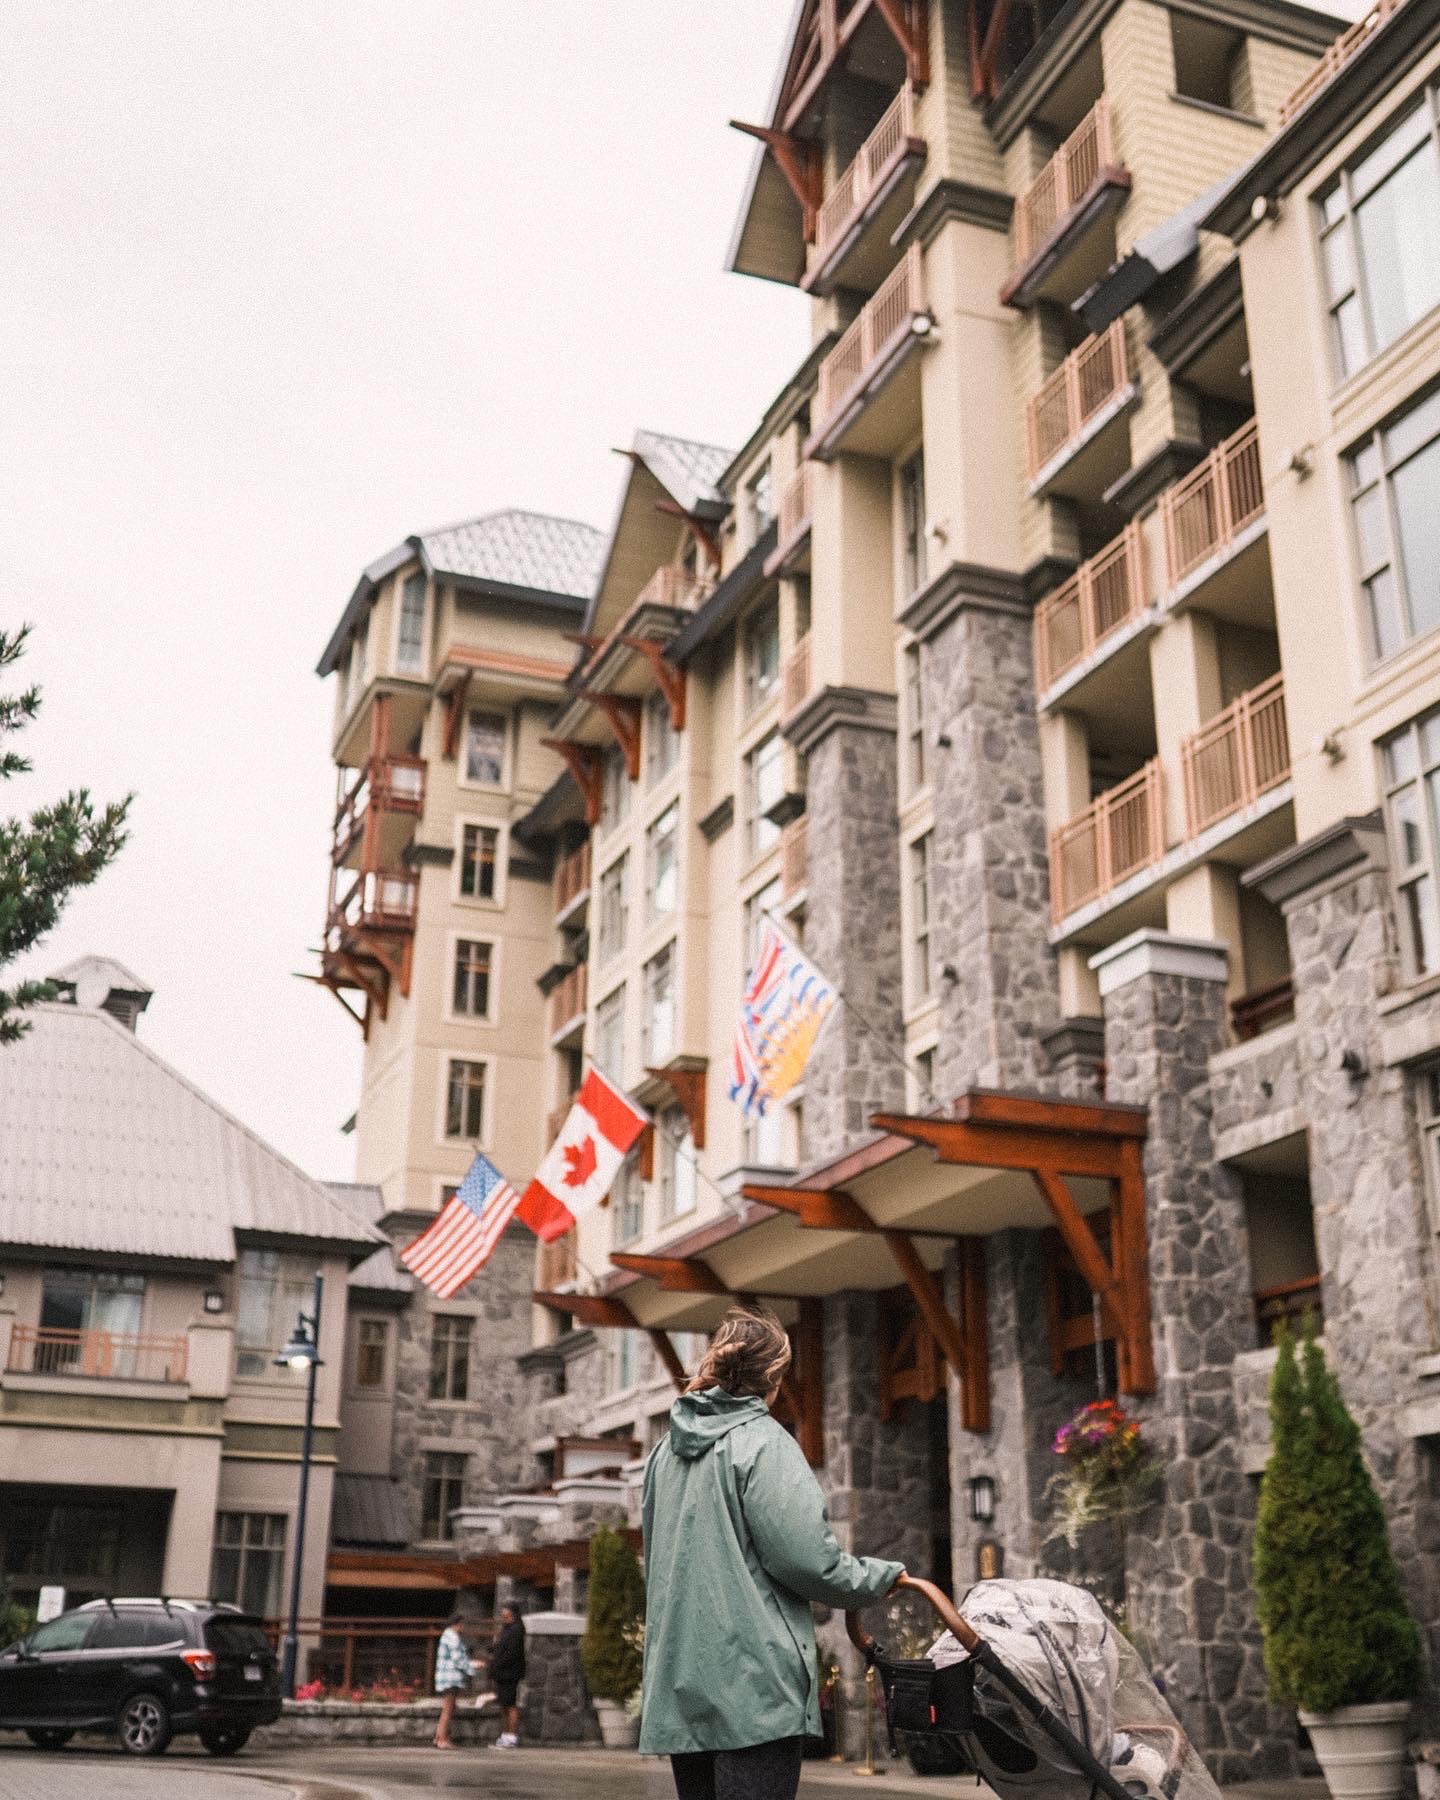 Pan Pacific in Whistler, Canada